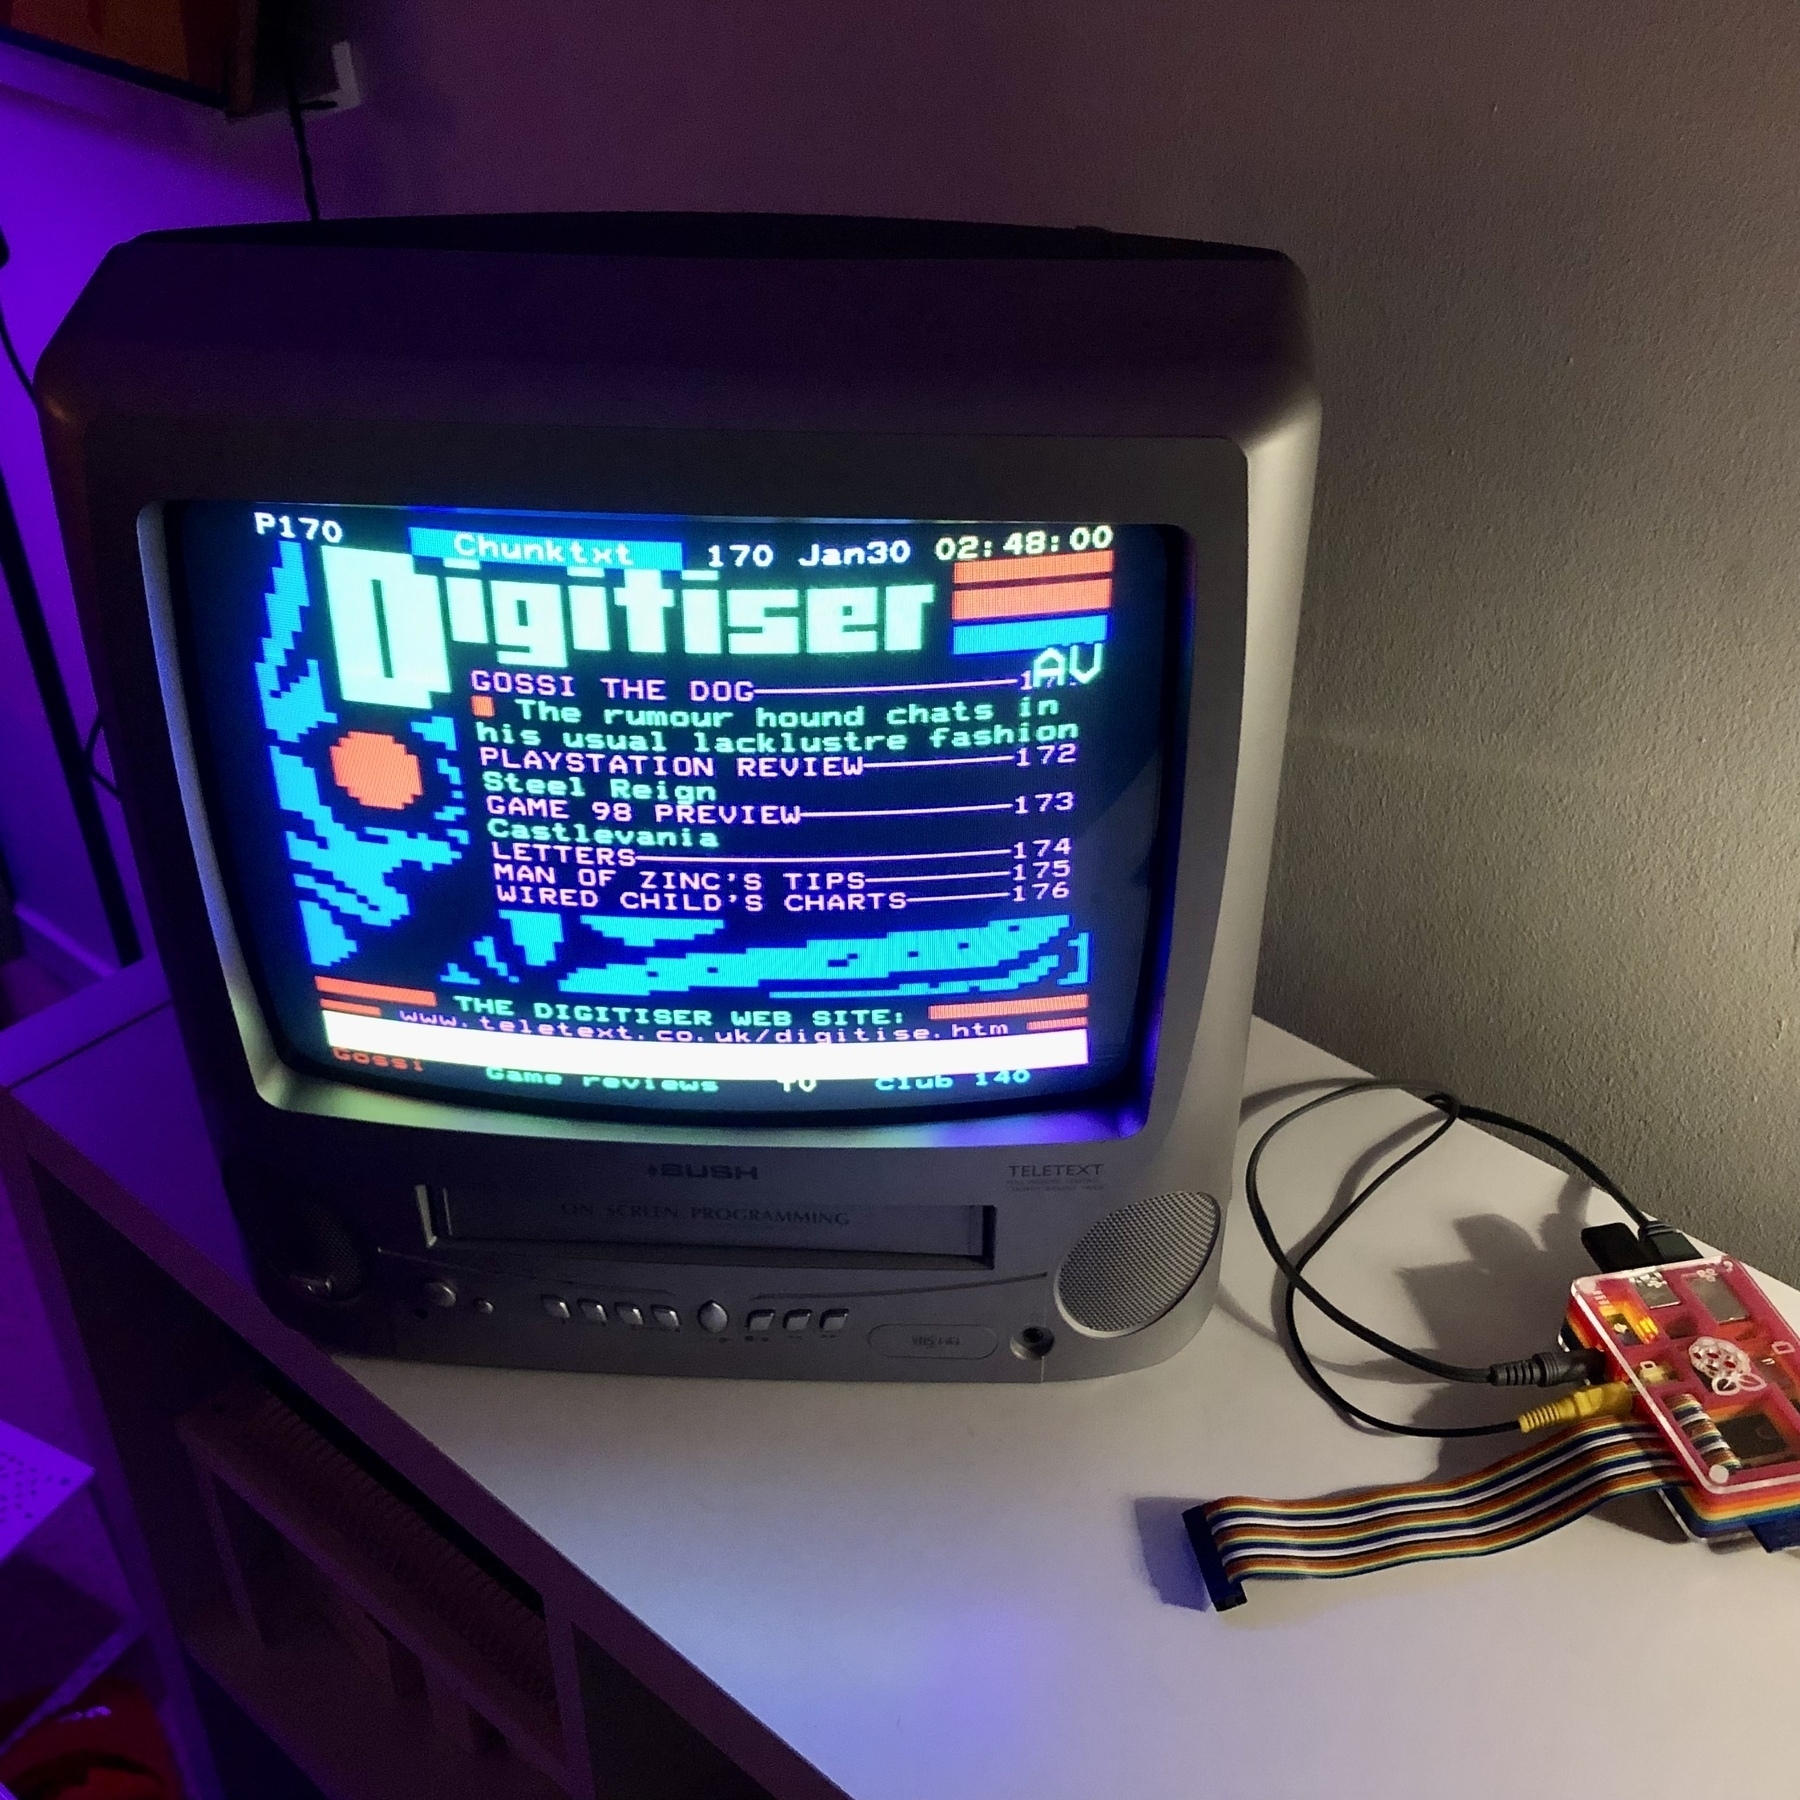 Television set showing teletext (powered by Raspberry Pi)